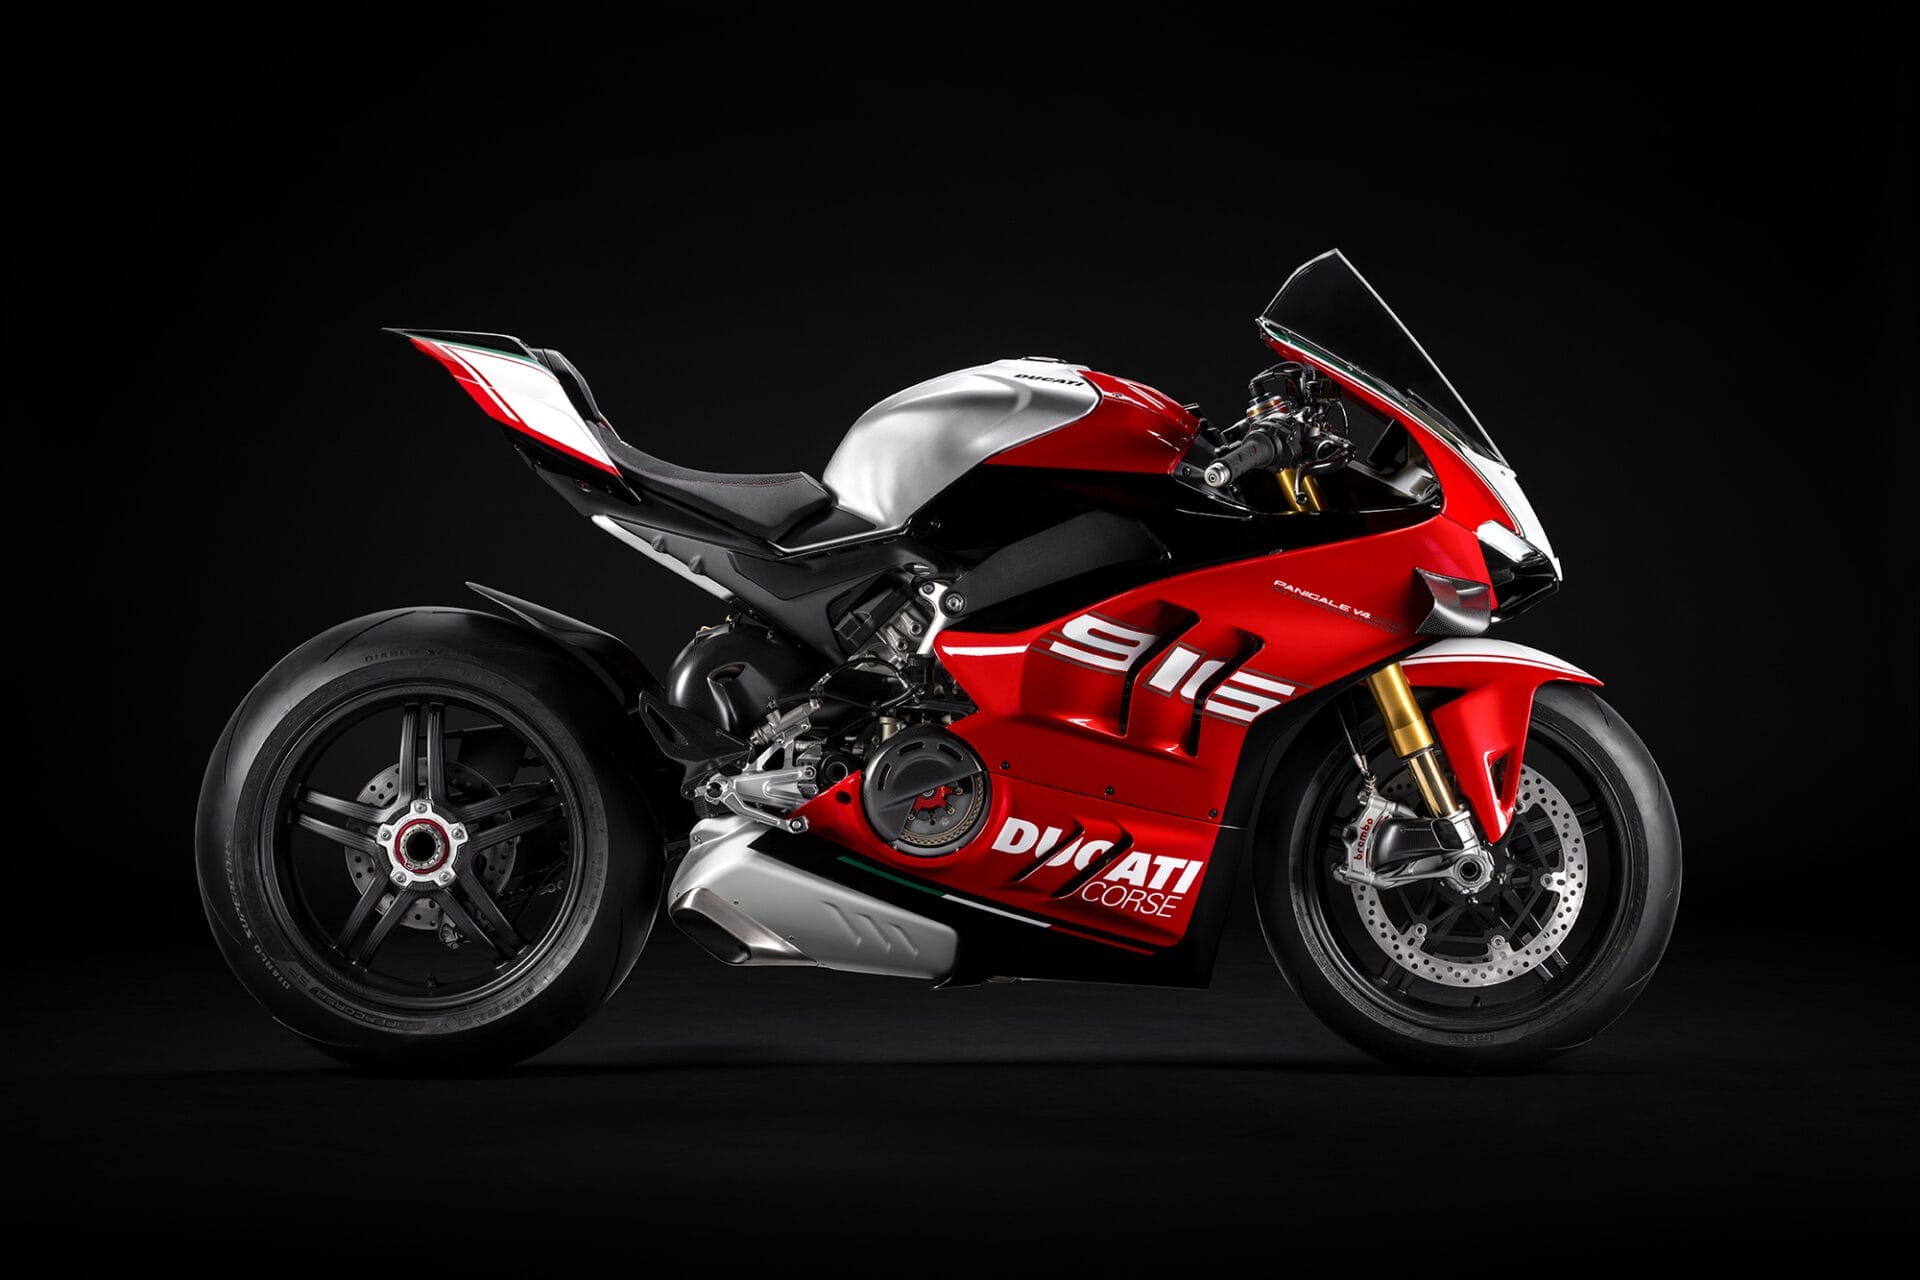 The Ducati Panigale V4 SP2 30° Anniversario 916 – A tribute to the supersport legend